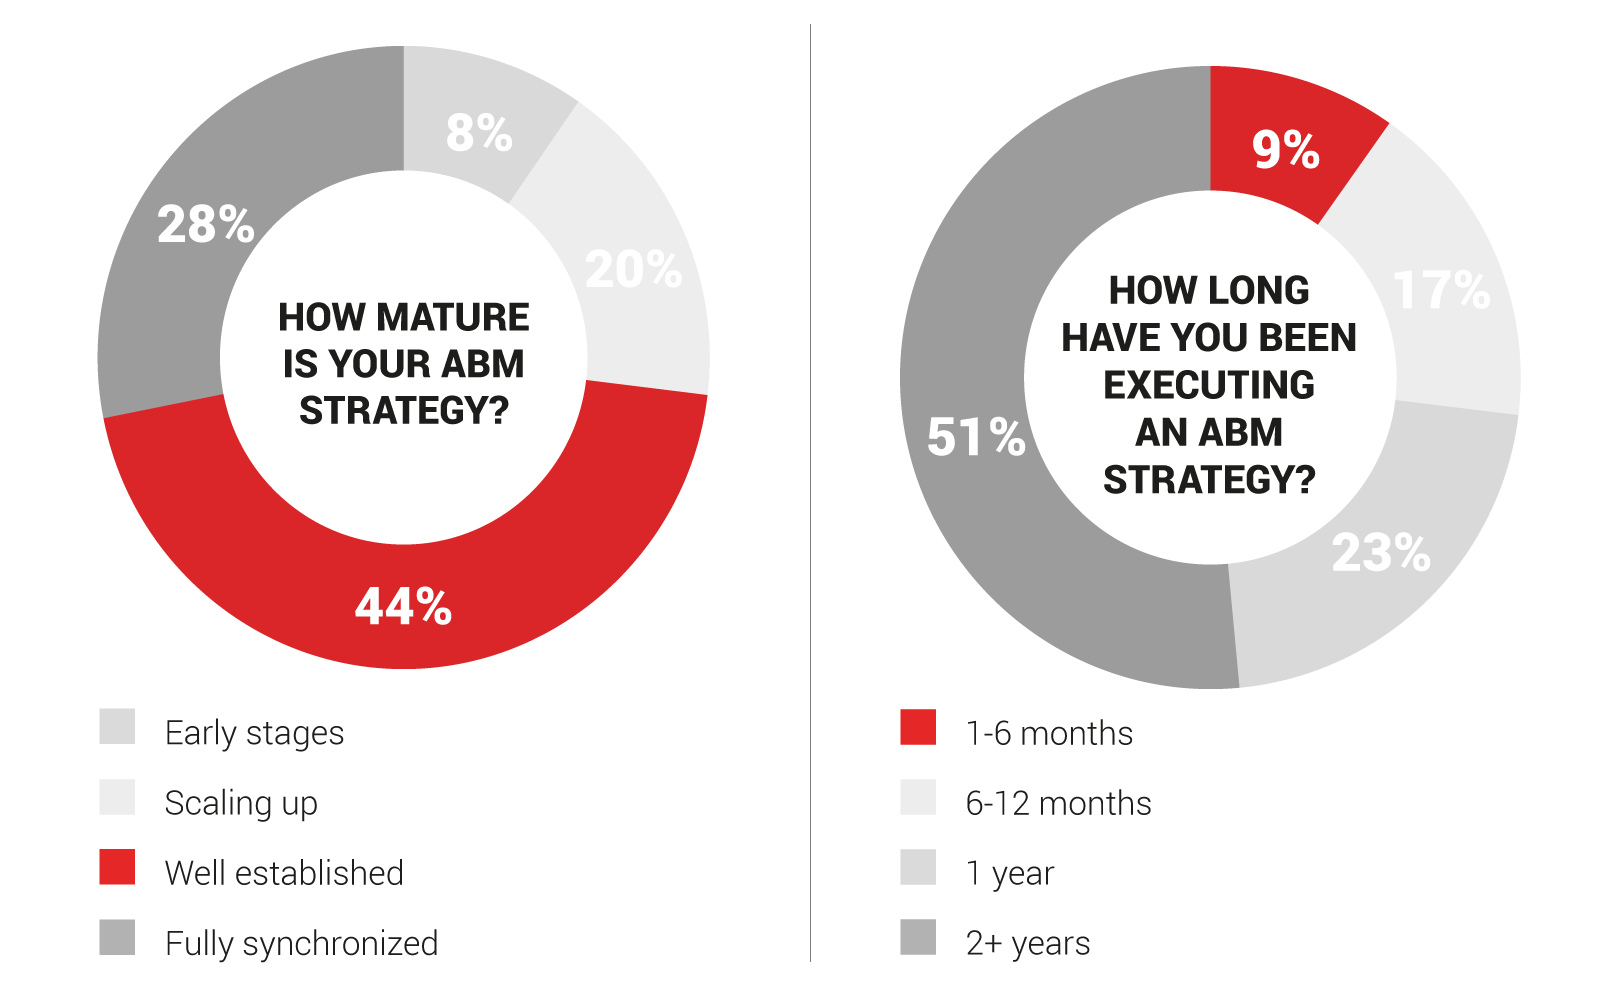 Inbox Insight shares on the maturity of Account-Based Marketing strategies among B2B marketers